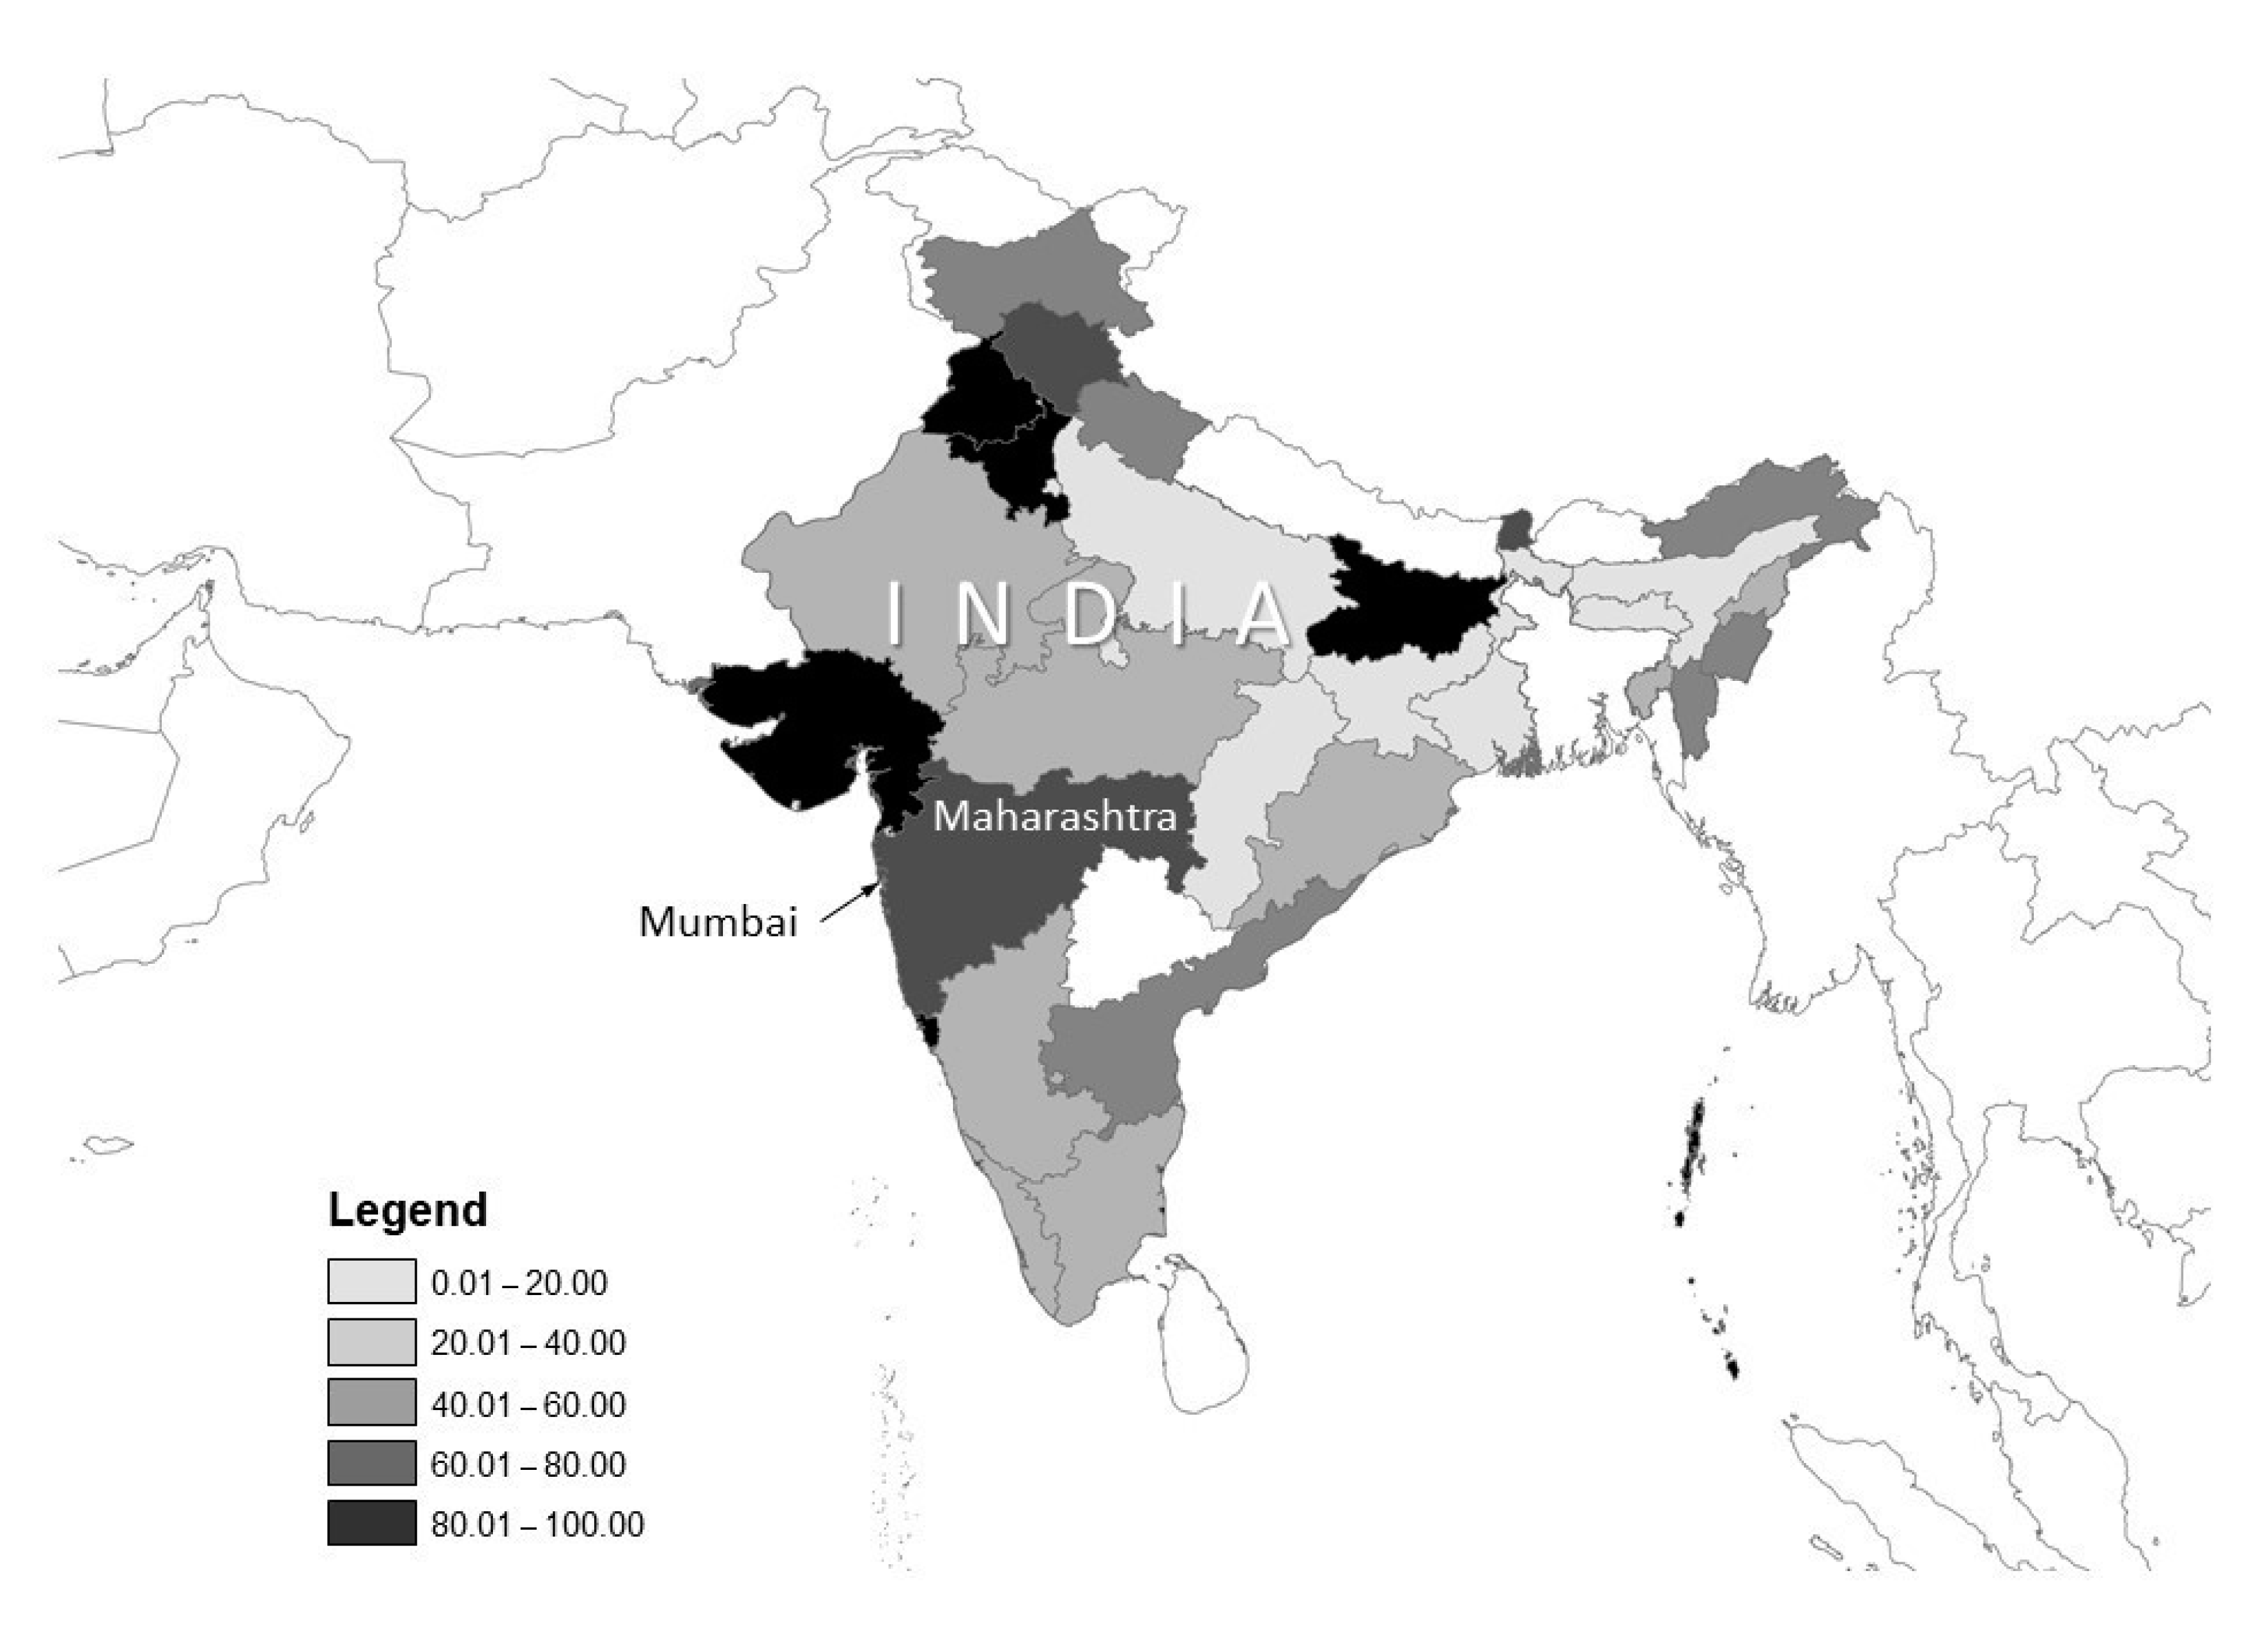 Sustainability | Free Full-Text | District Drinking Water Planning for  Sustainability in Maharashtra: Between Local and Global Scales